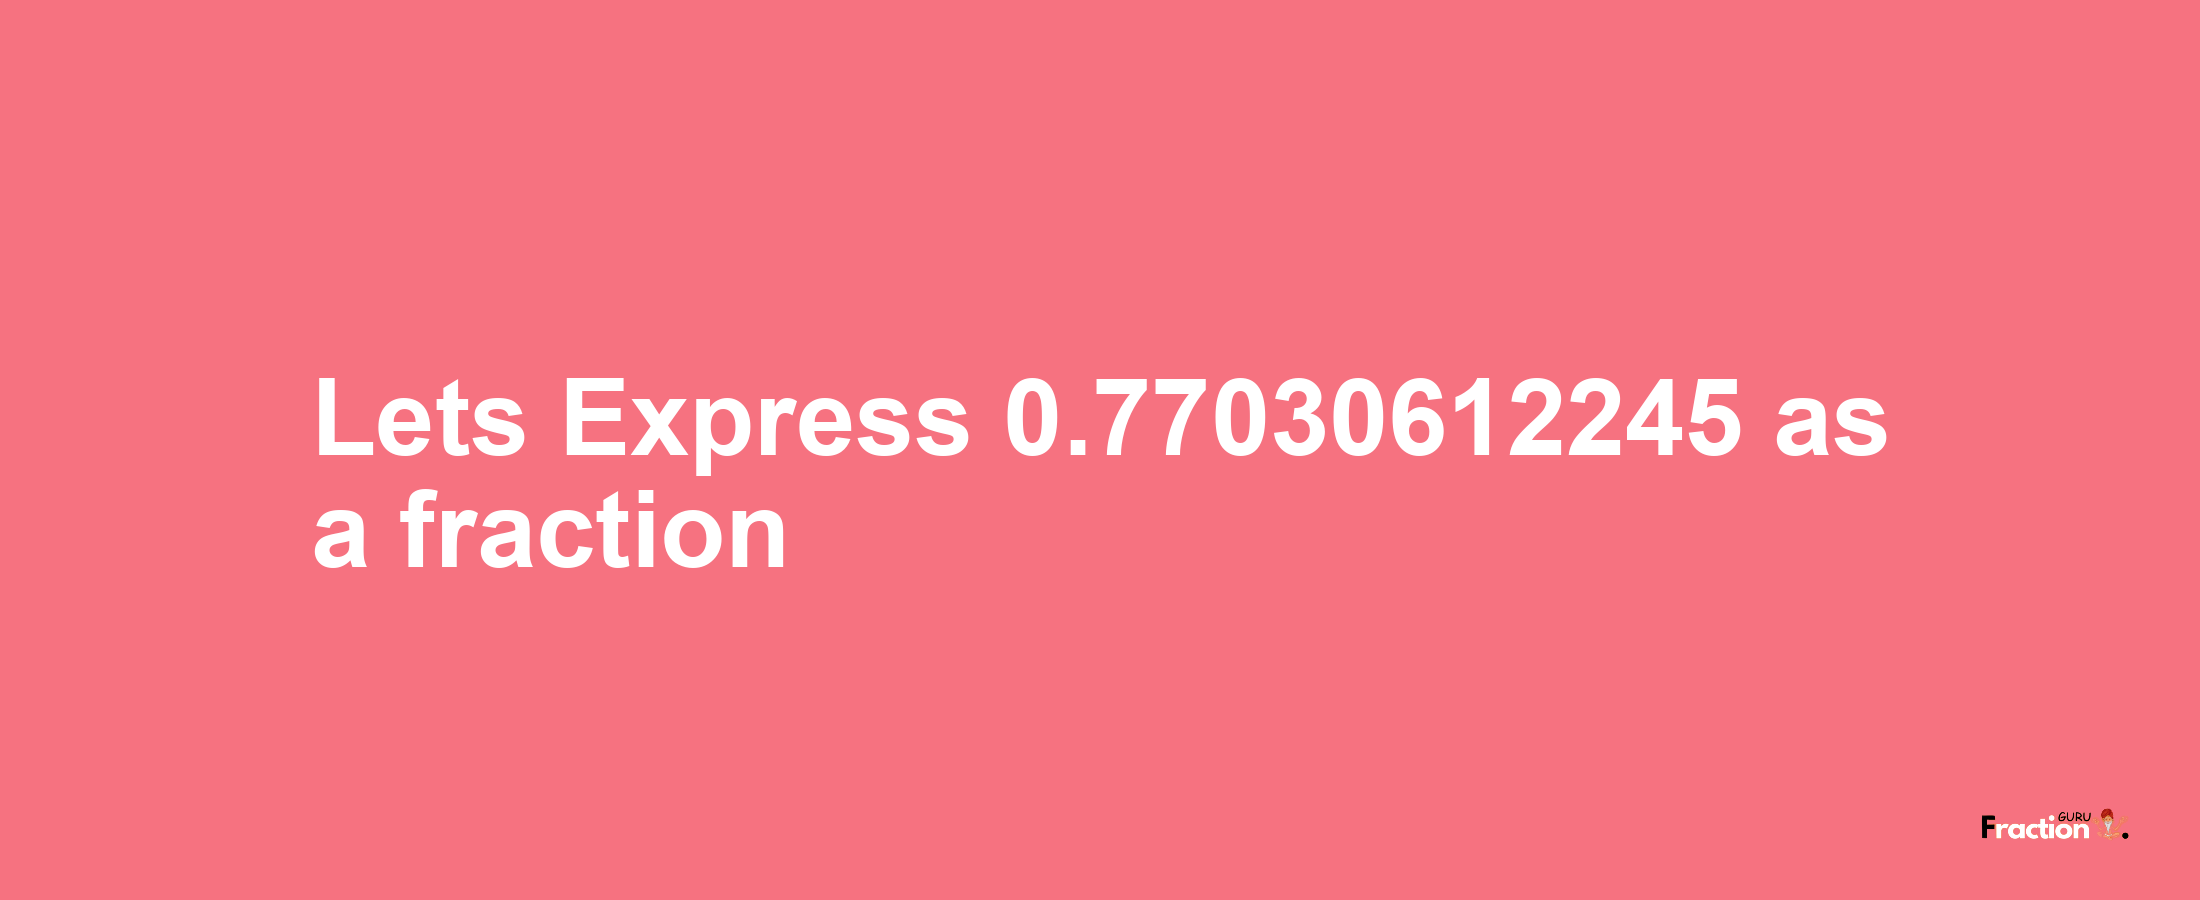 Lets Express 0.77030612245 as afraction